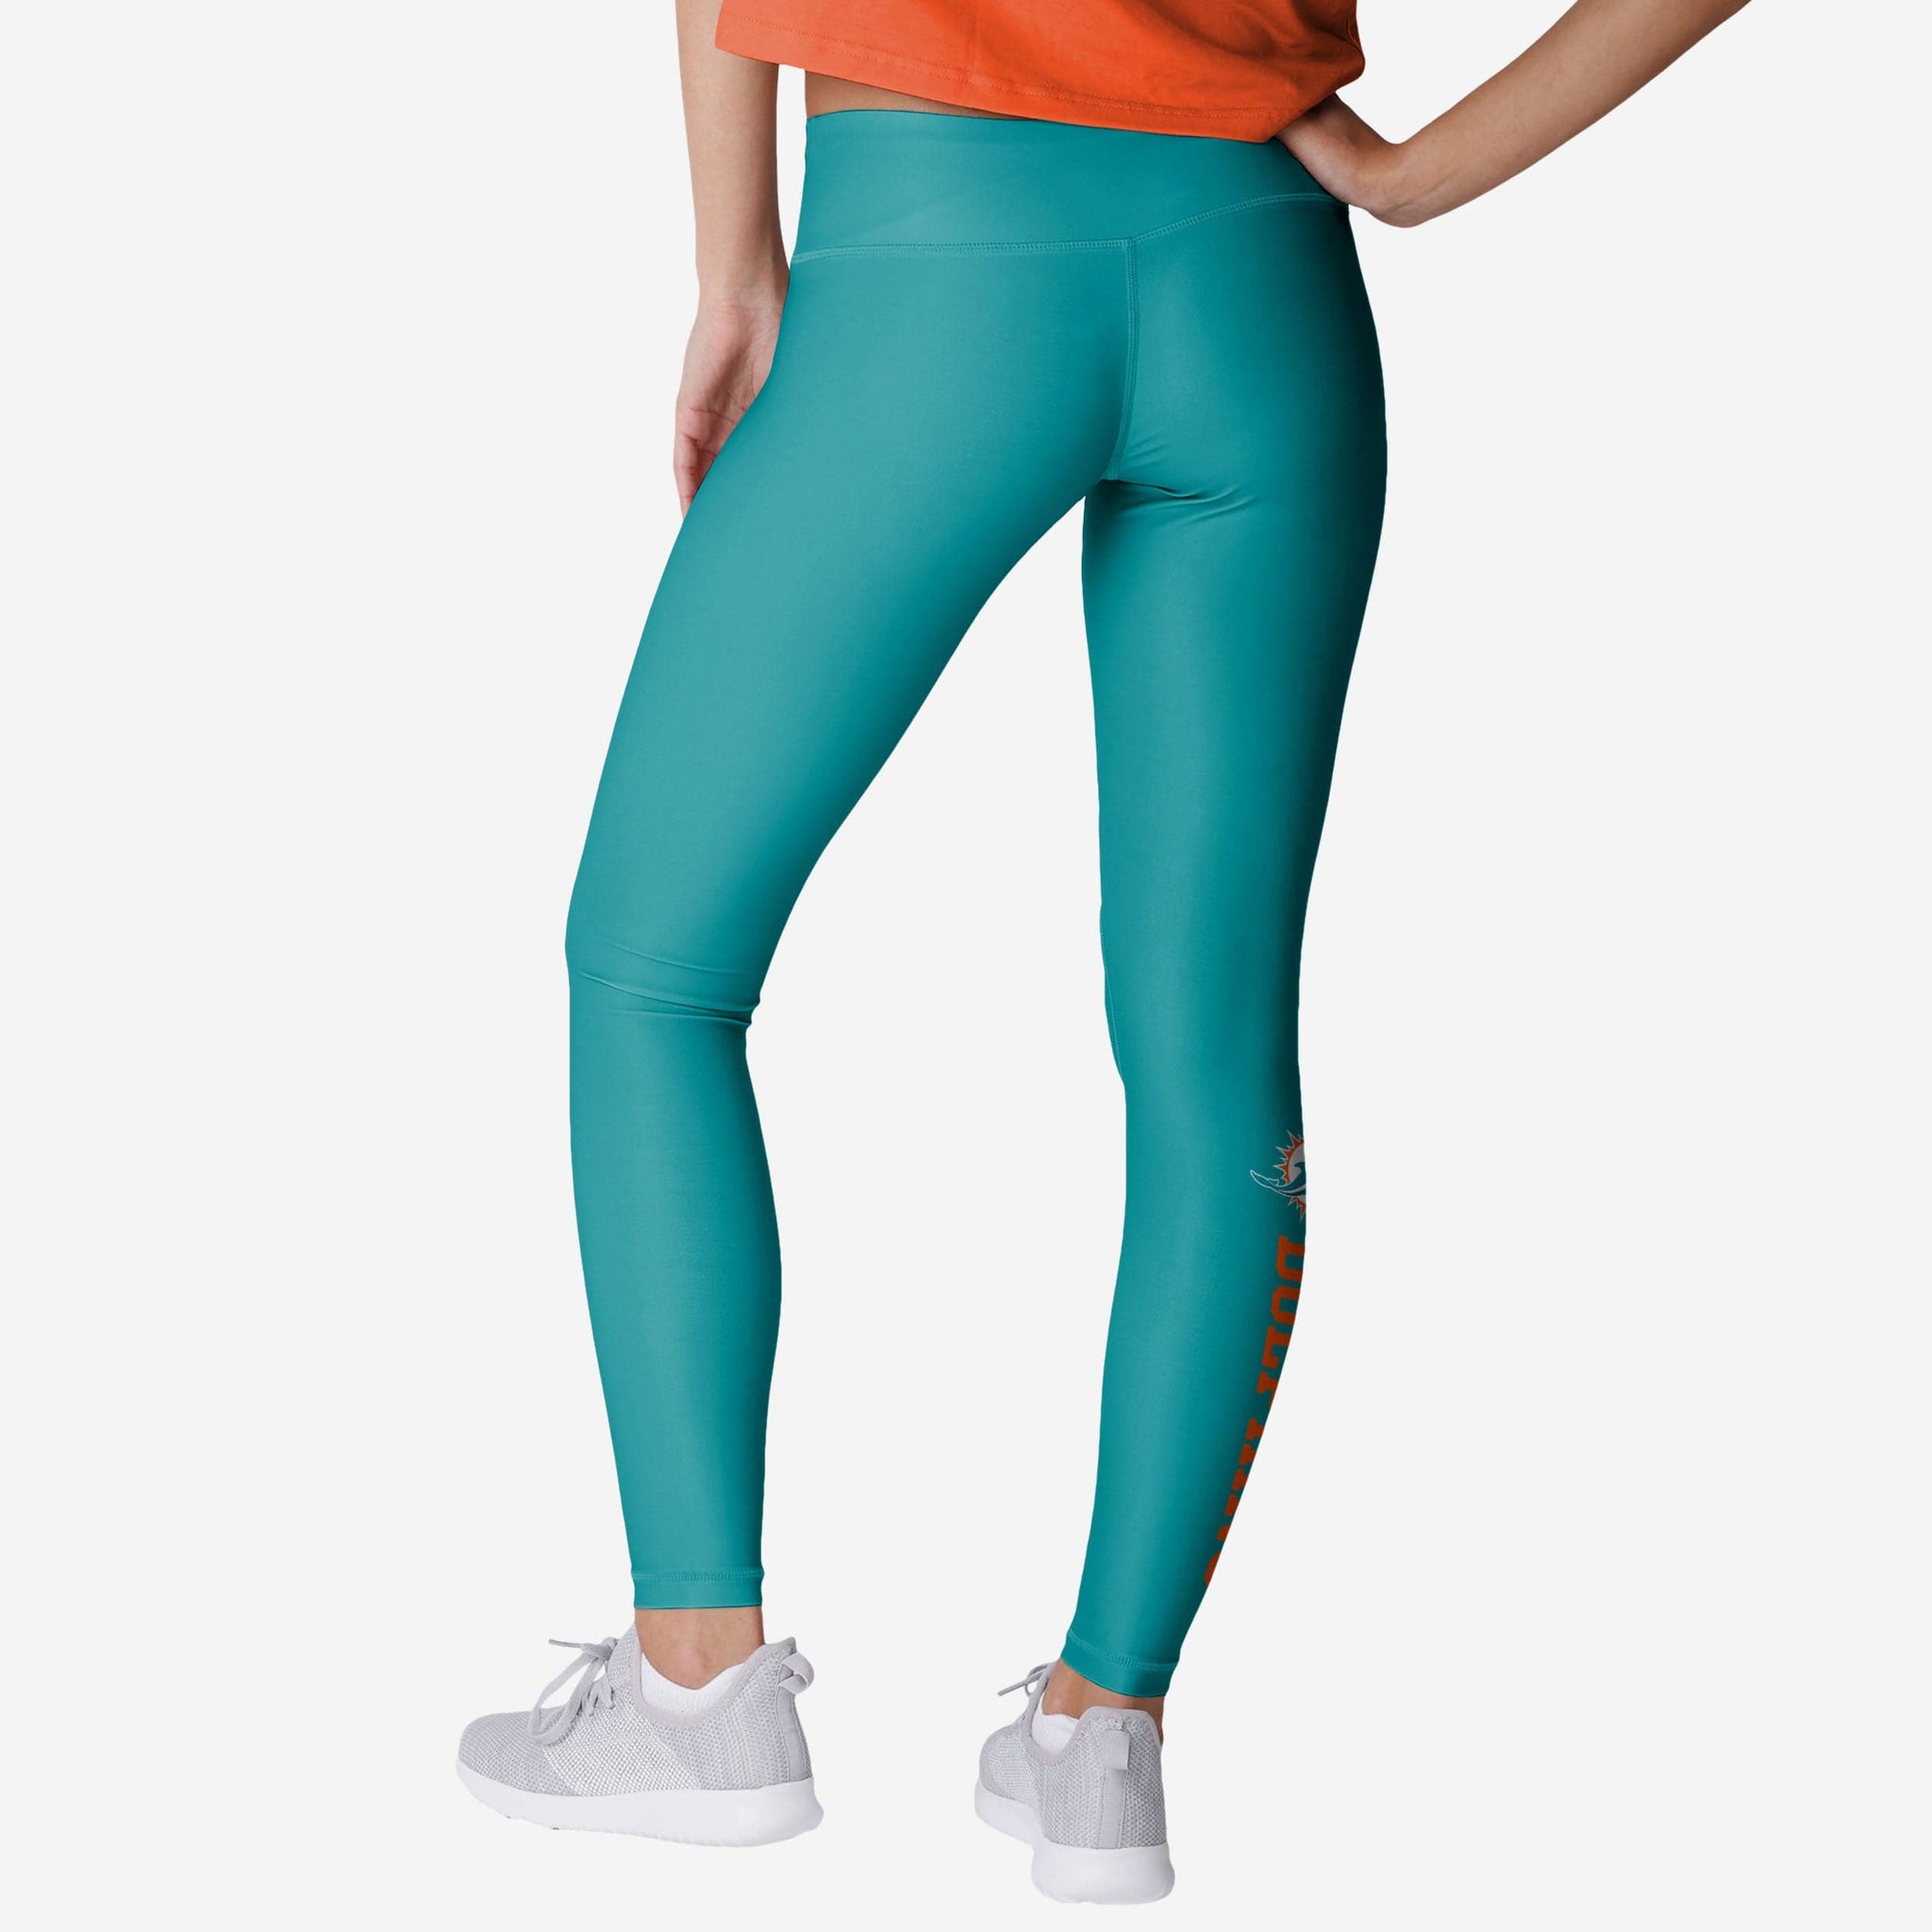 Fitkin Women's Turquoise High Waist Basic Core Tights